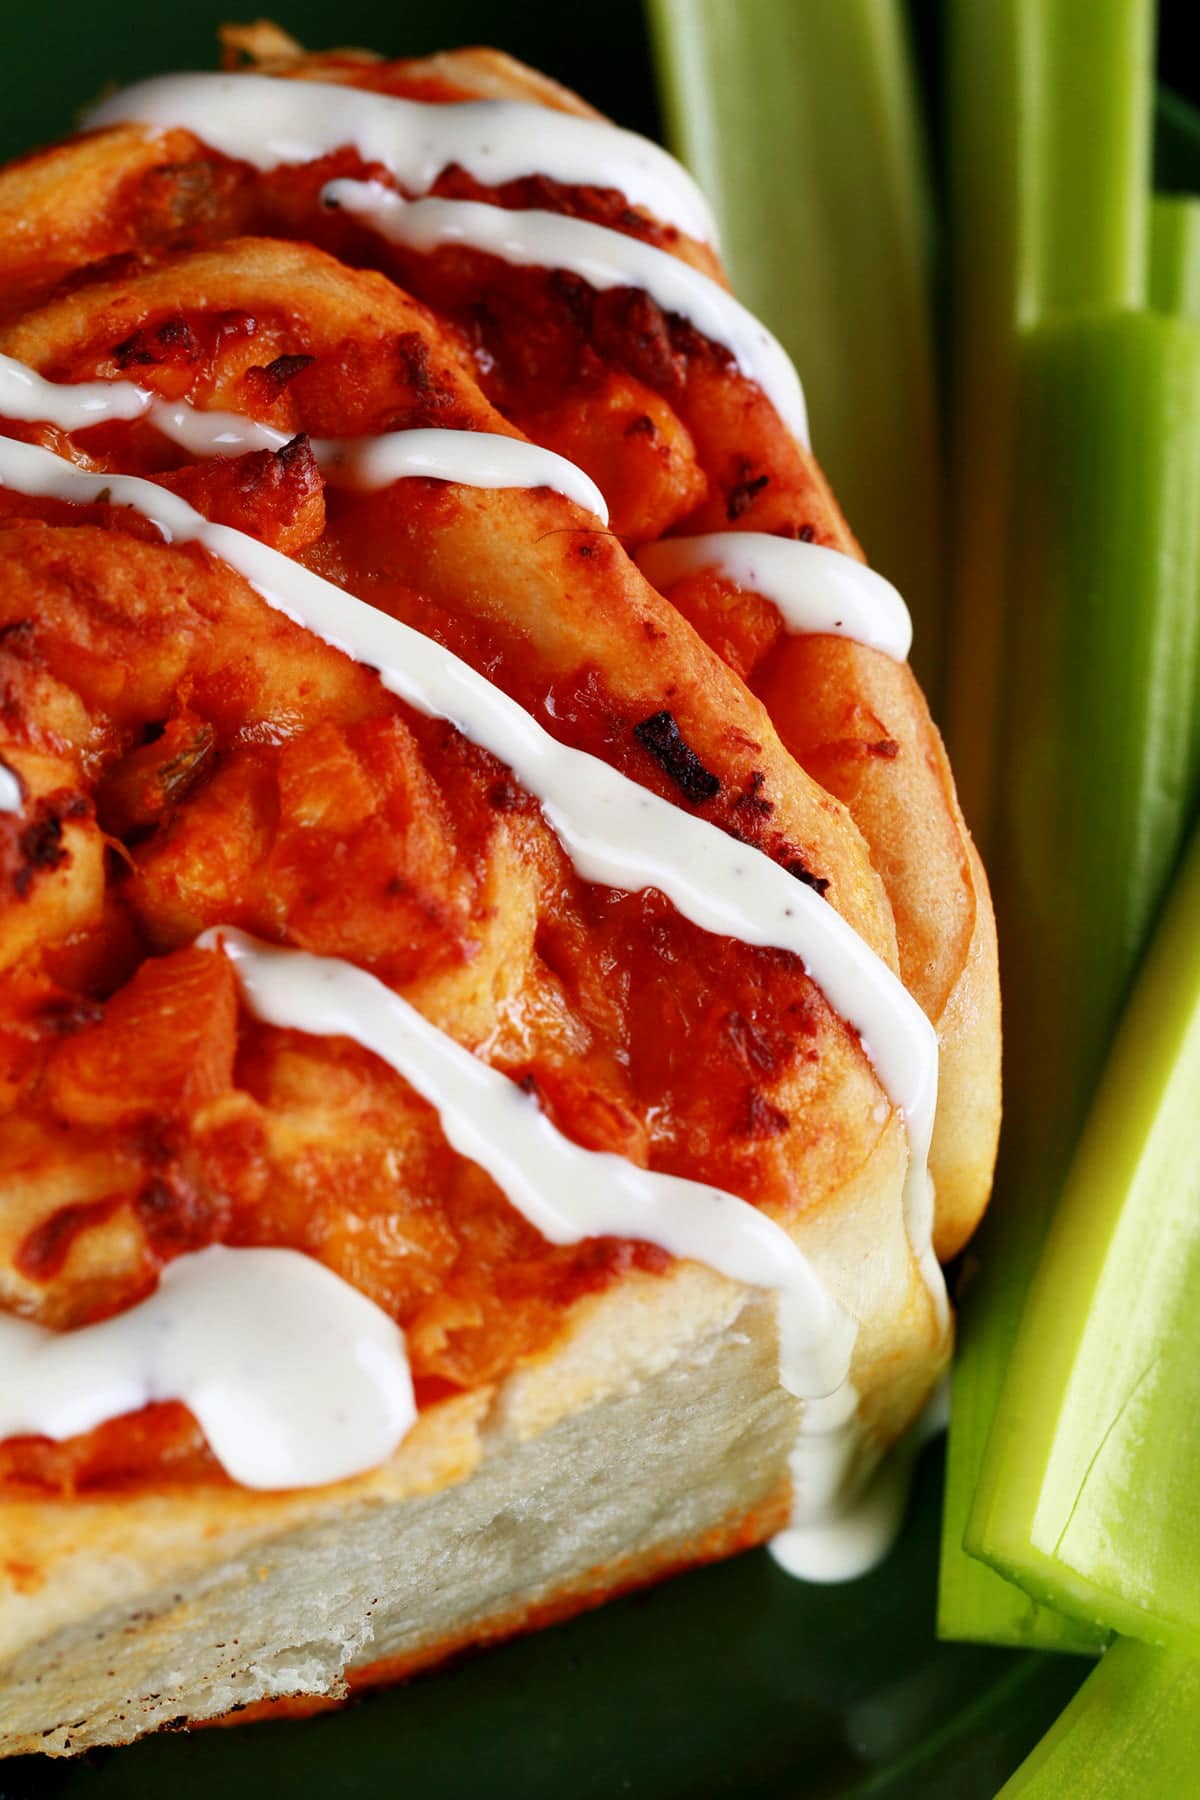 A close up photo of a buffalo chicken bun - like a cinnamon bun, but with a buffalo chicken filling instead. It is drizzled with ranch dressing, and has celery sticks on the side.